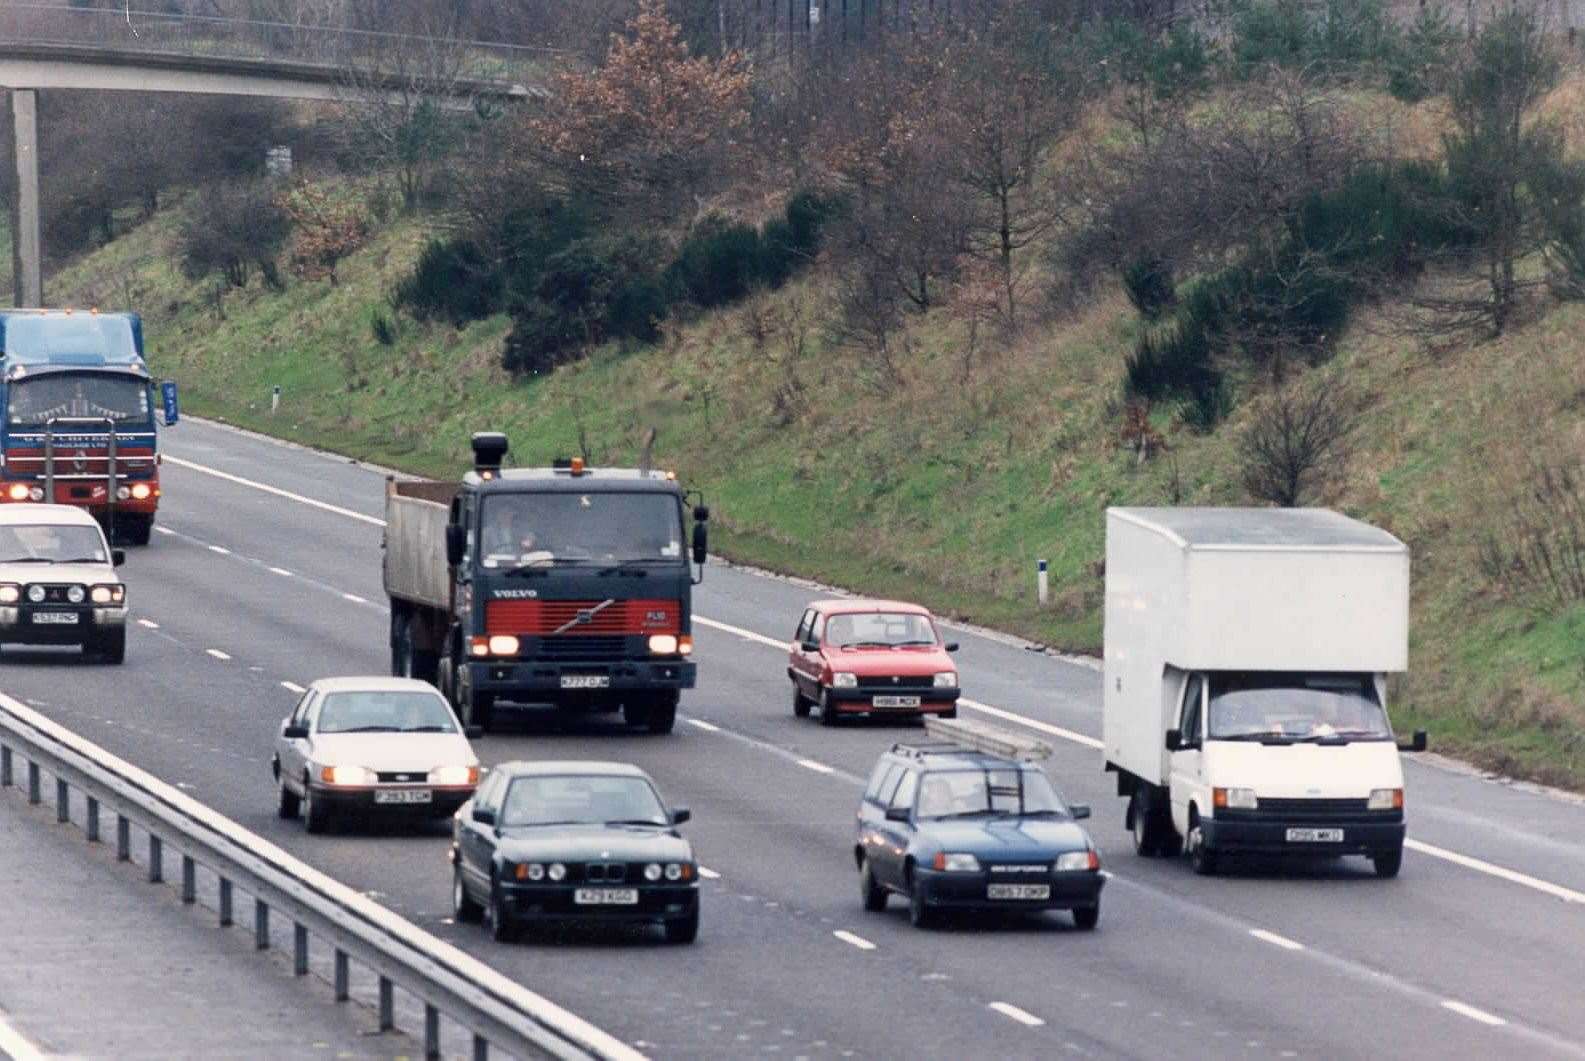 M20 Motorway pictured in 1995